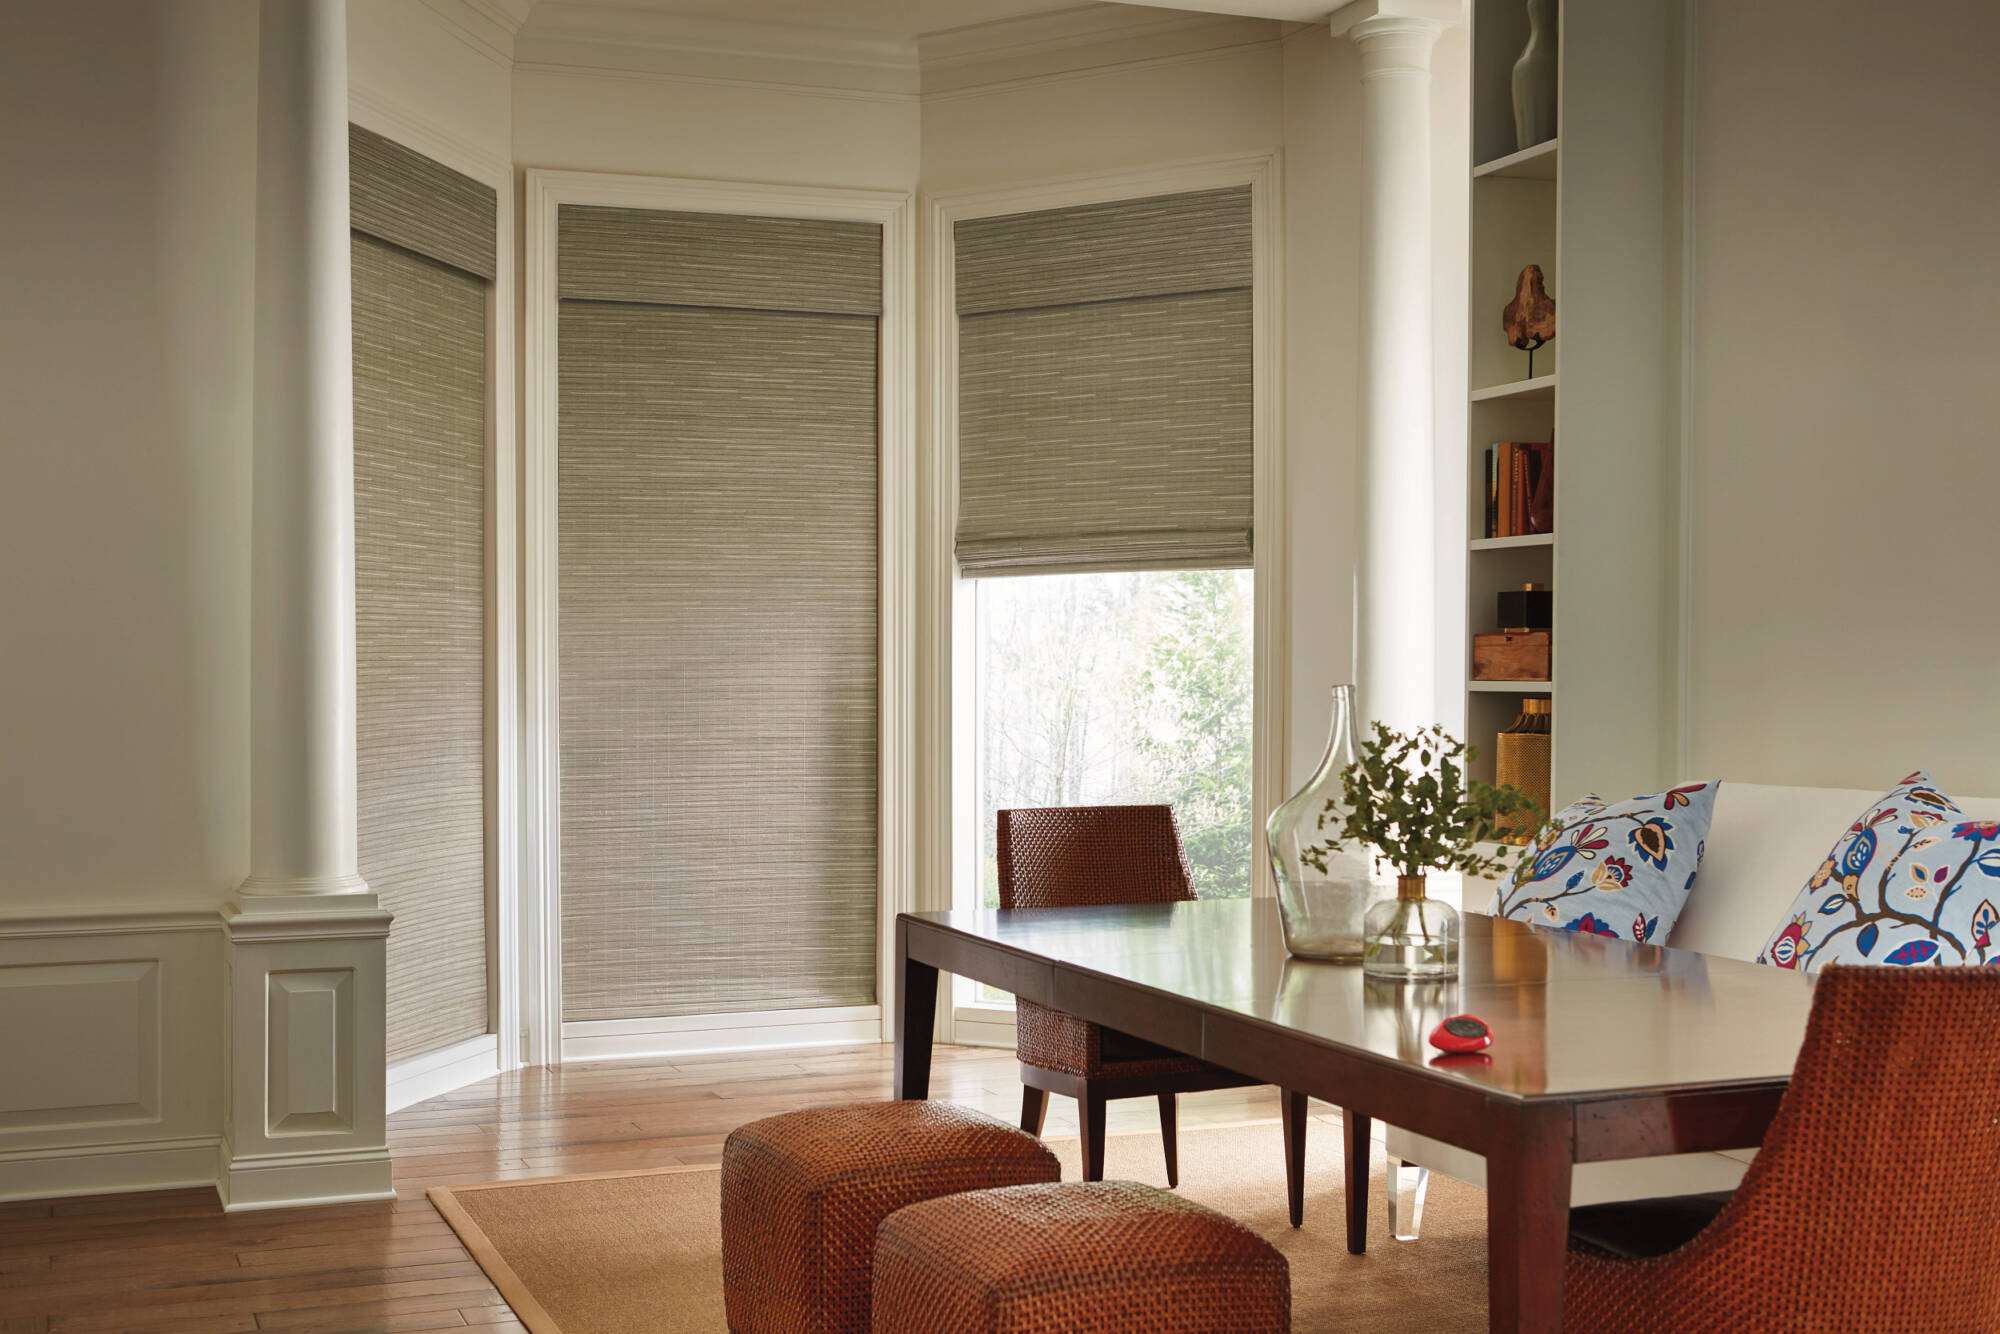 Insolroll Elements Decorative Roller Shades Zenith Blackout fabric